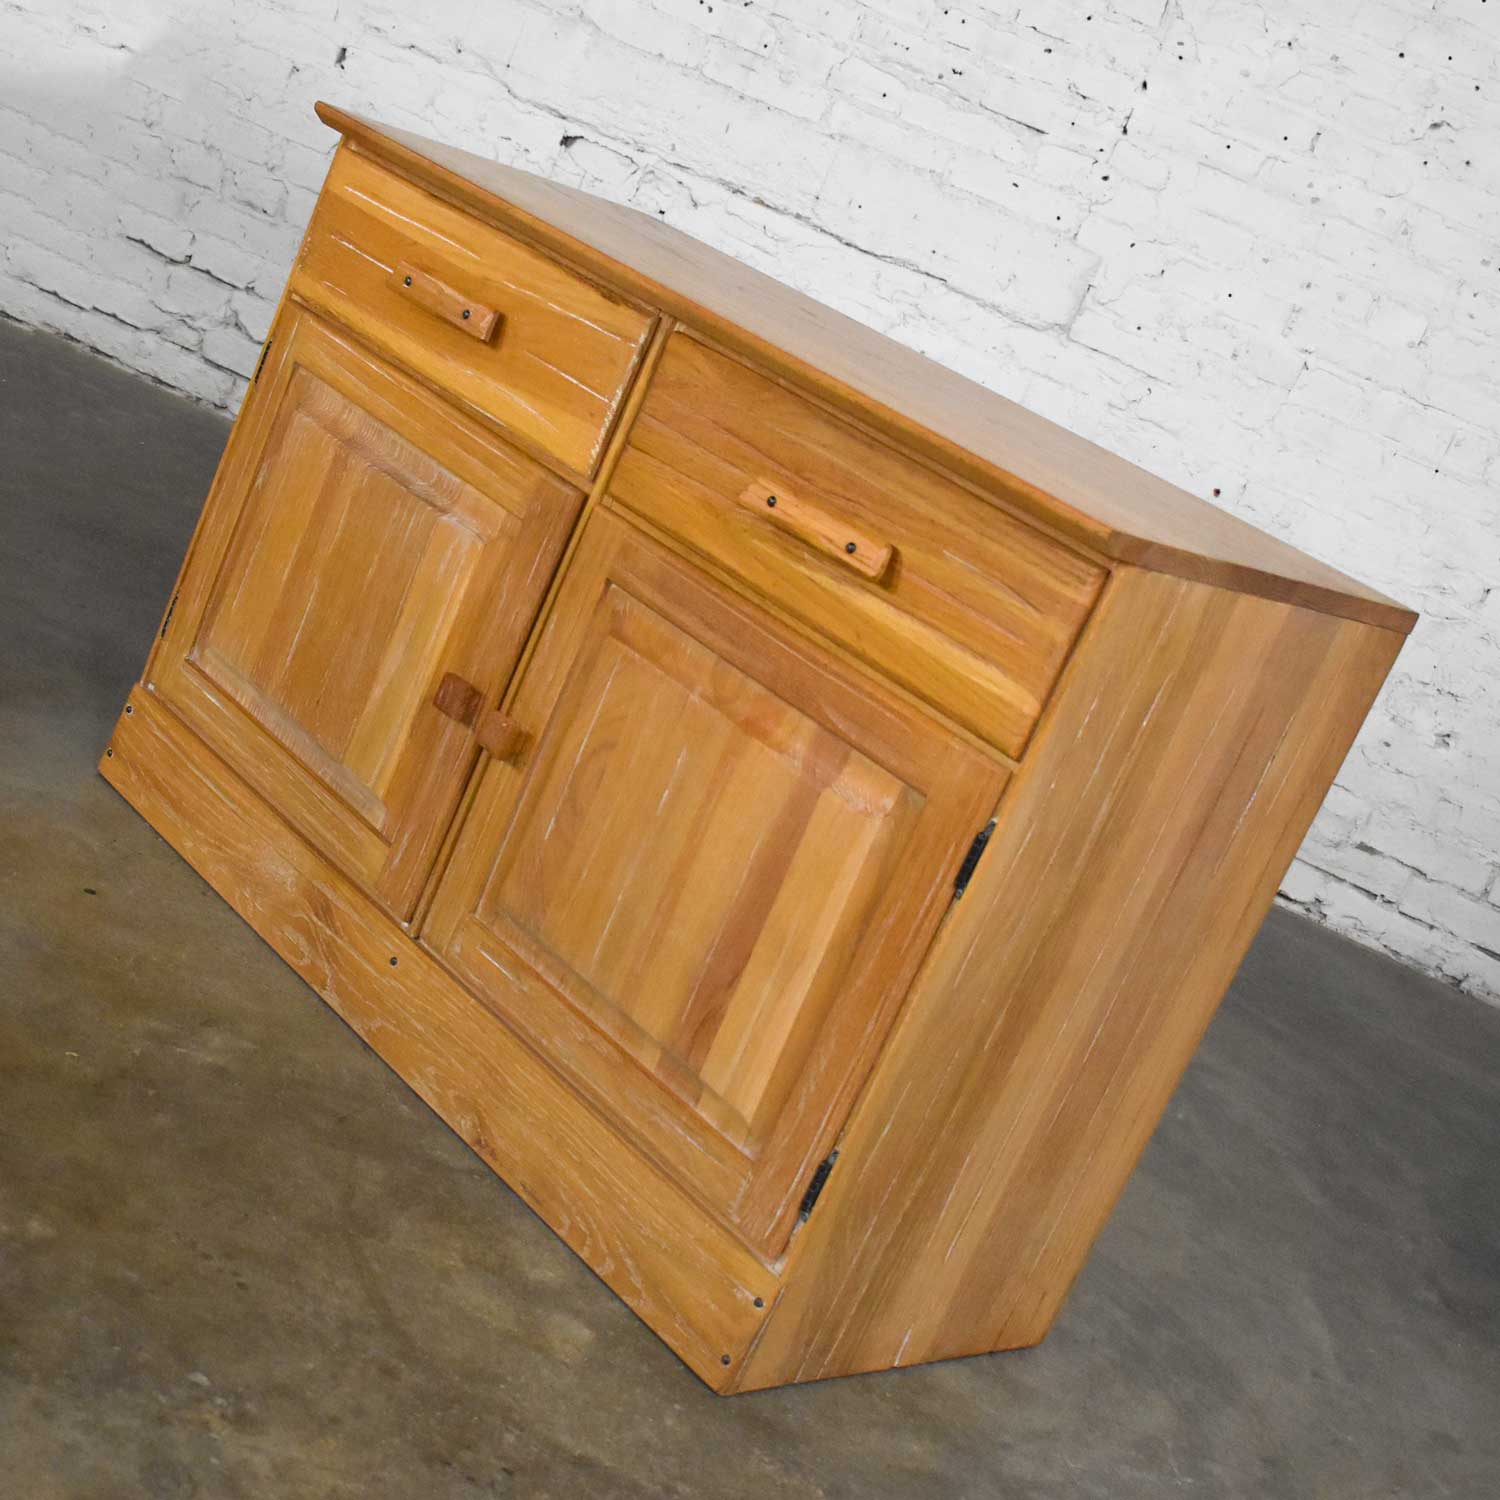 Vintage Ranch Oak Pair of Small Credenzas or Buffet Cabinets by A. Brandt Company